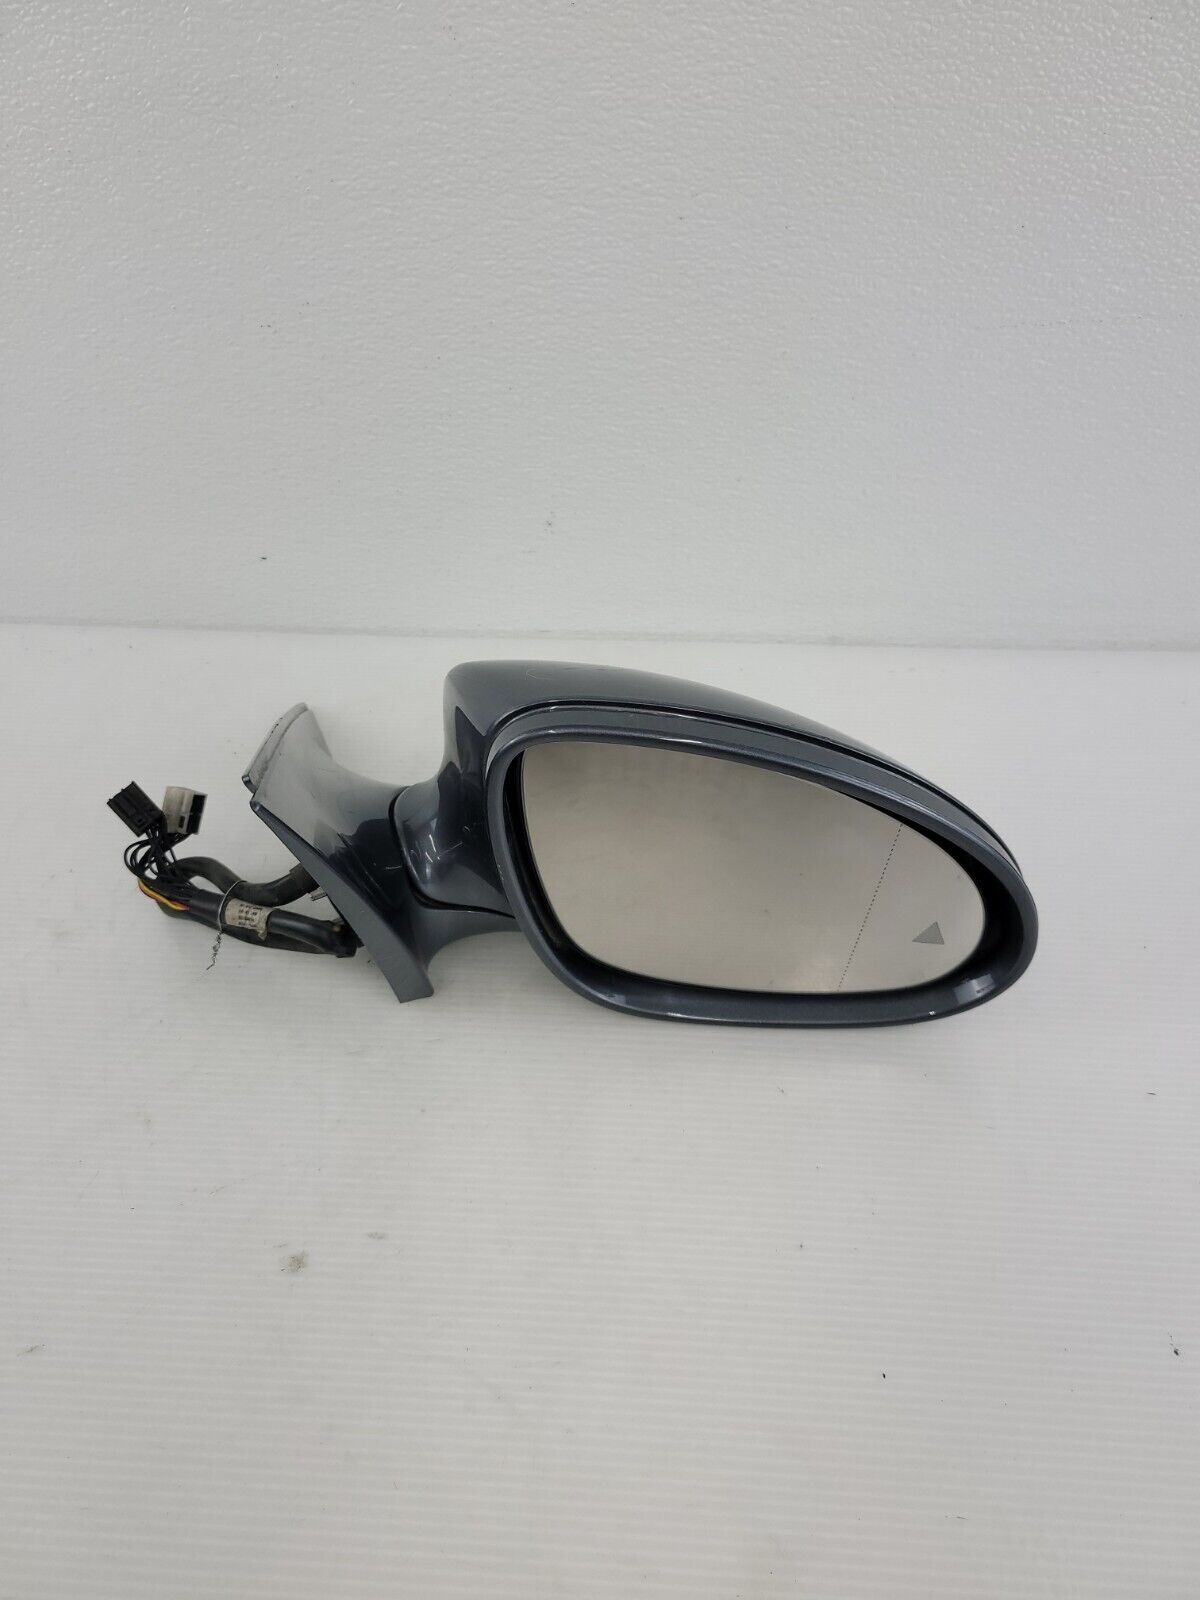 07-09 MERCEDES W221 S550  FRONT RIGHT SIDE MIRROR ASSAMBLY EURO GLASS GRAY OEM